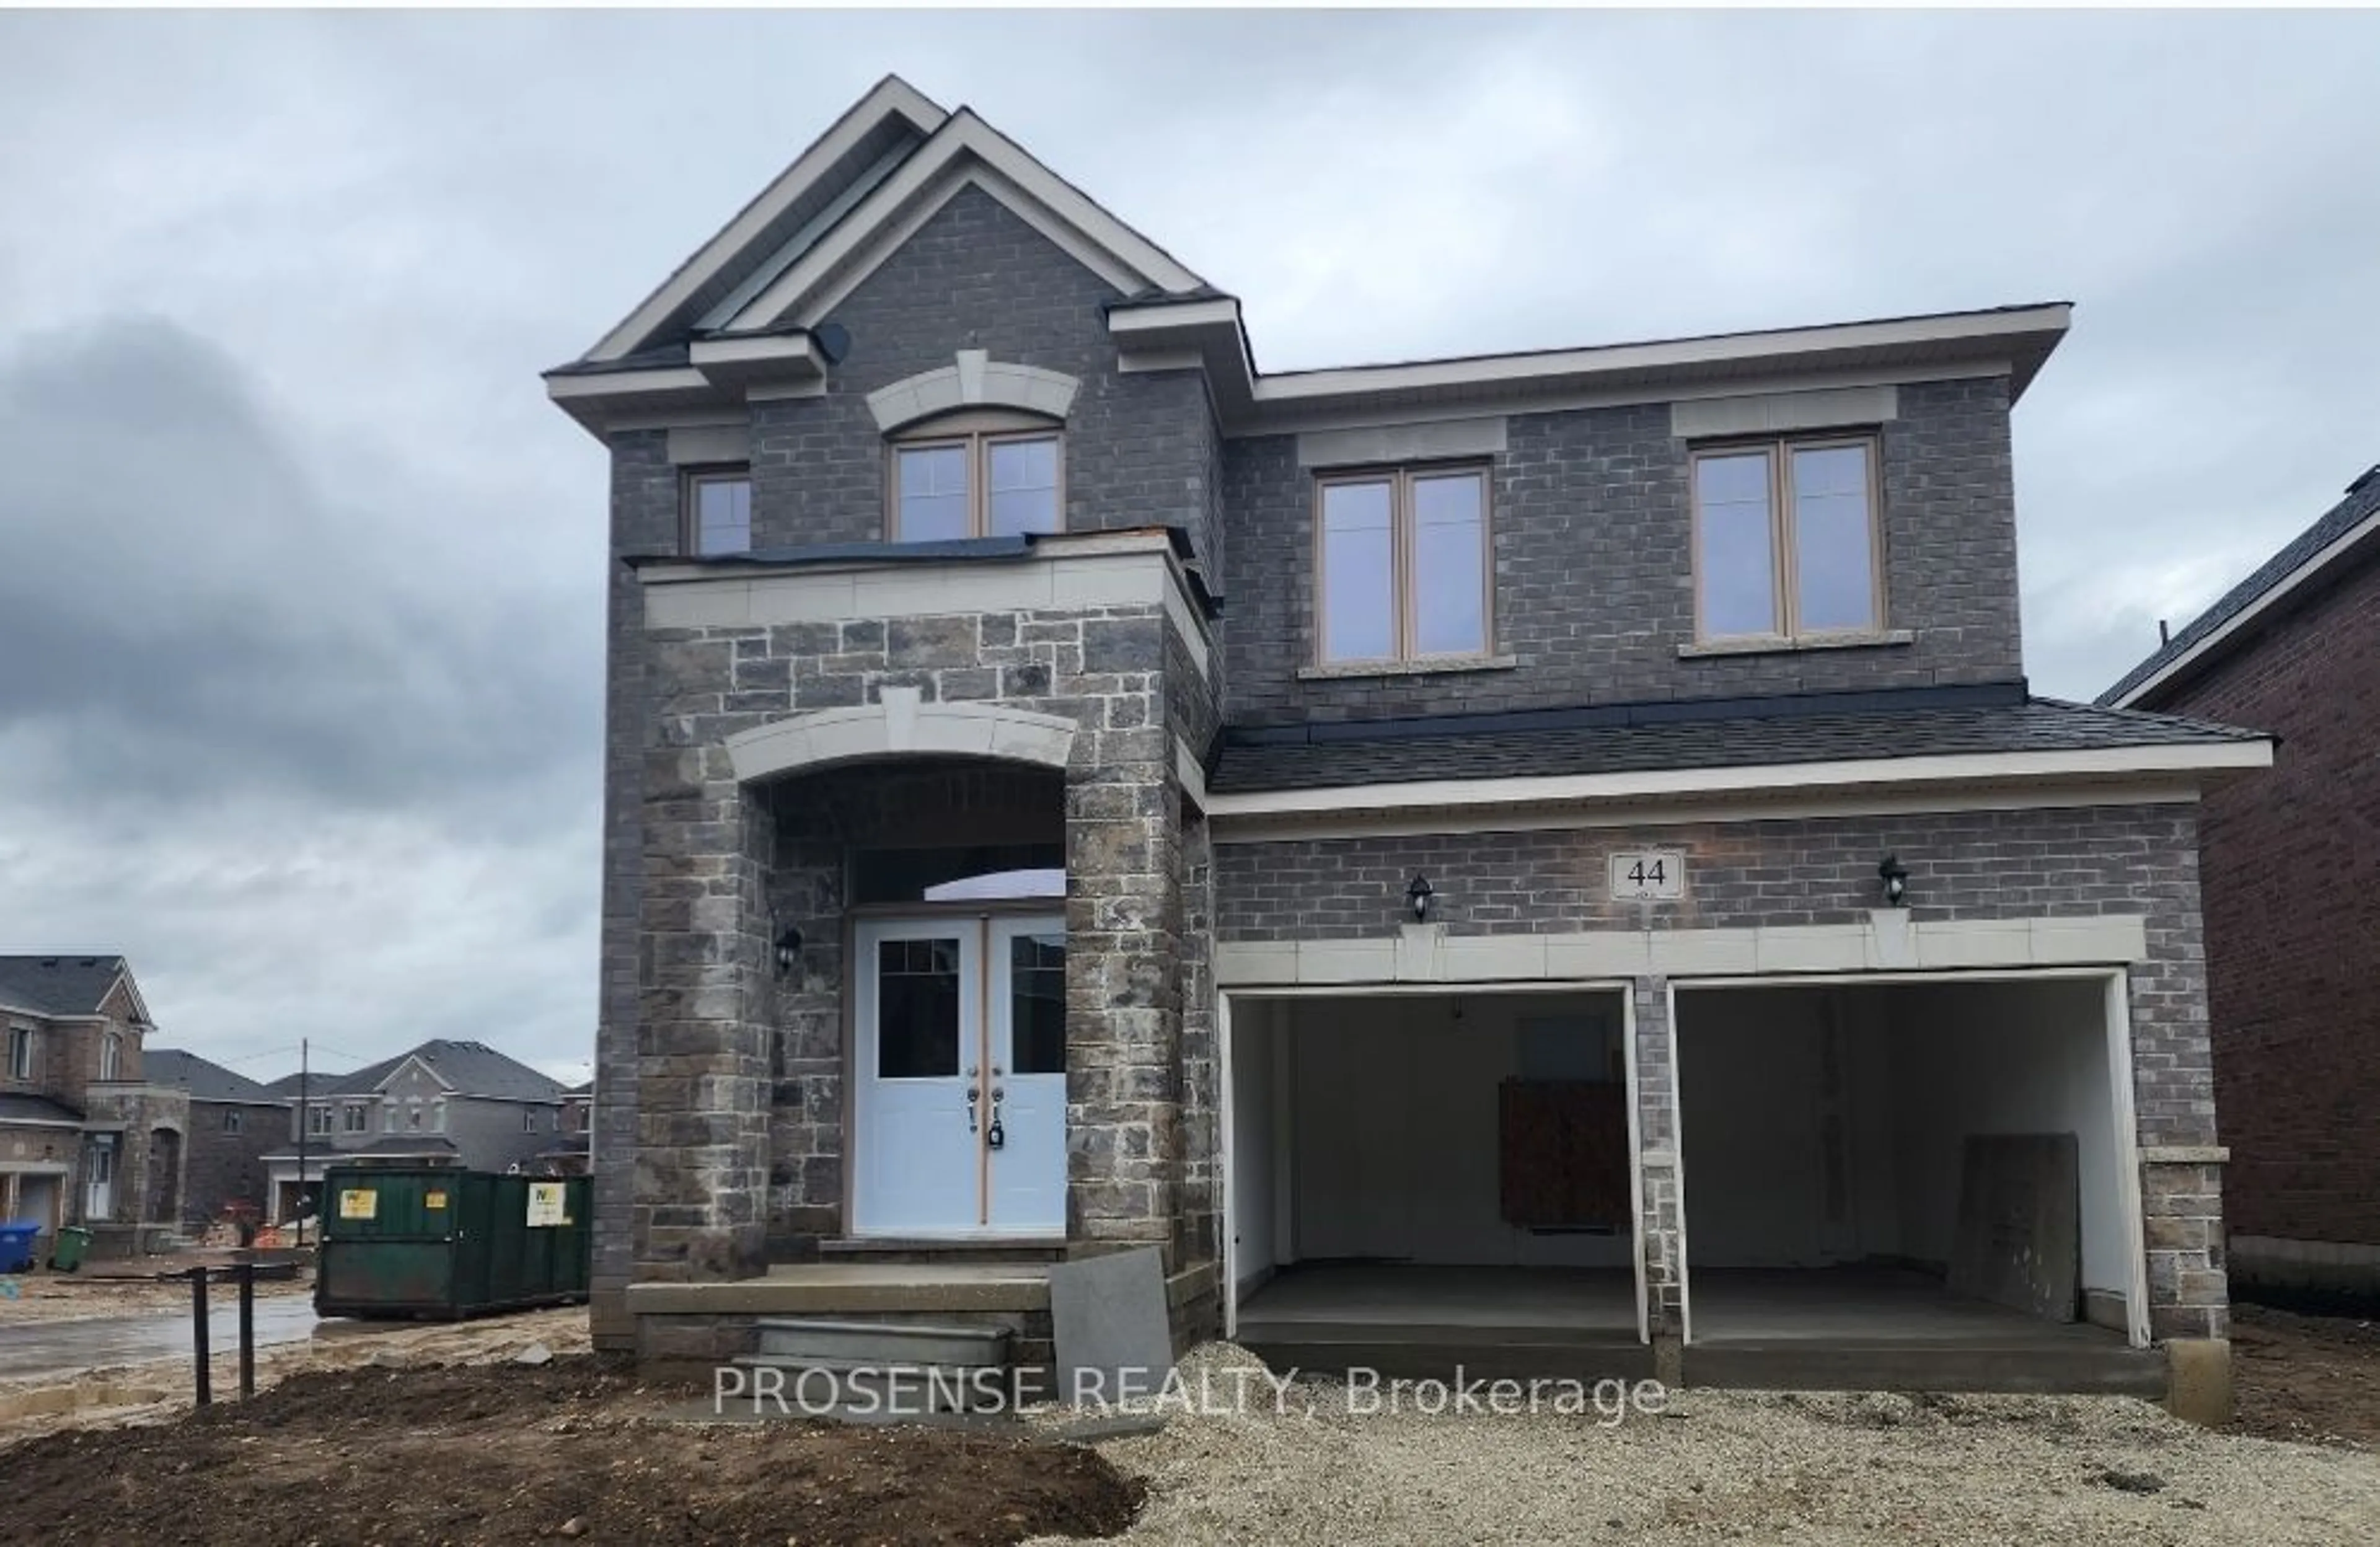 Home with brick exterior material for 44 Corbett St, Southgate Ontario N0C 1B0